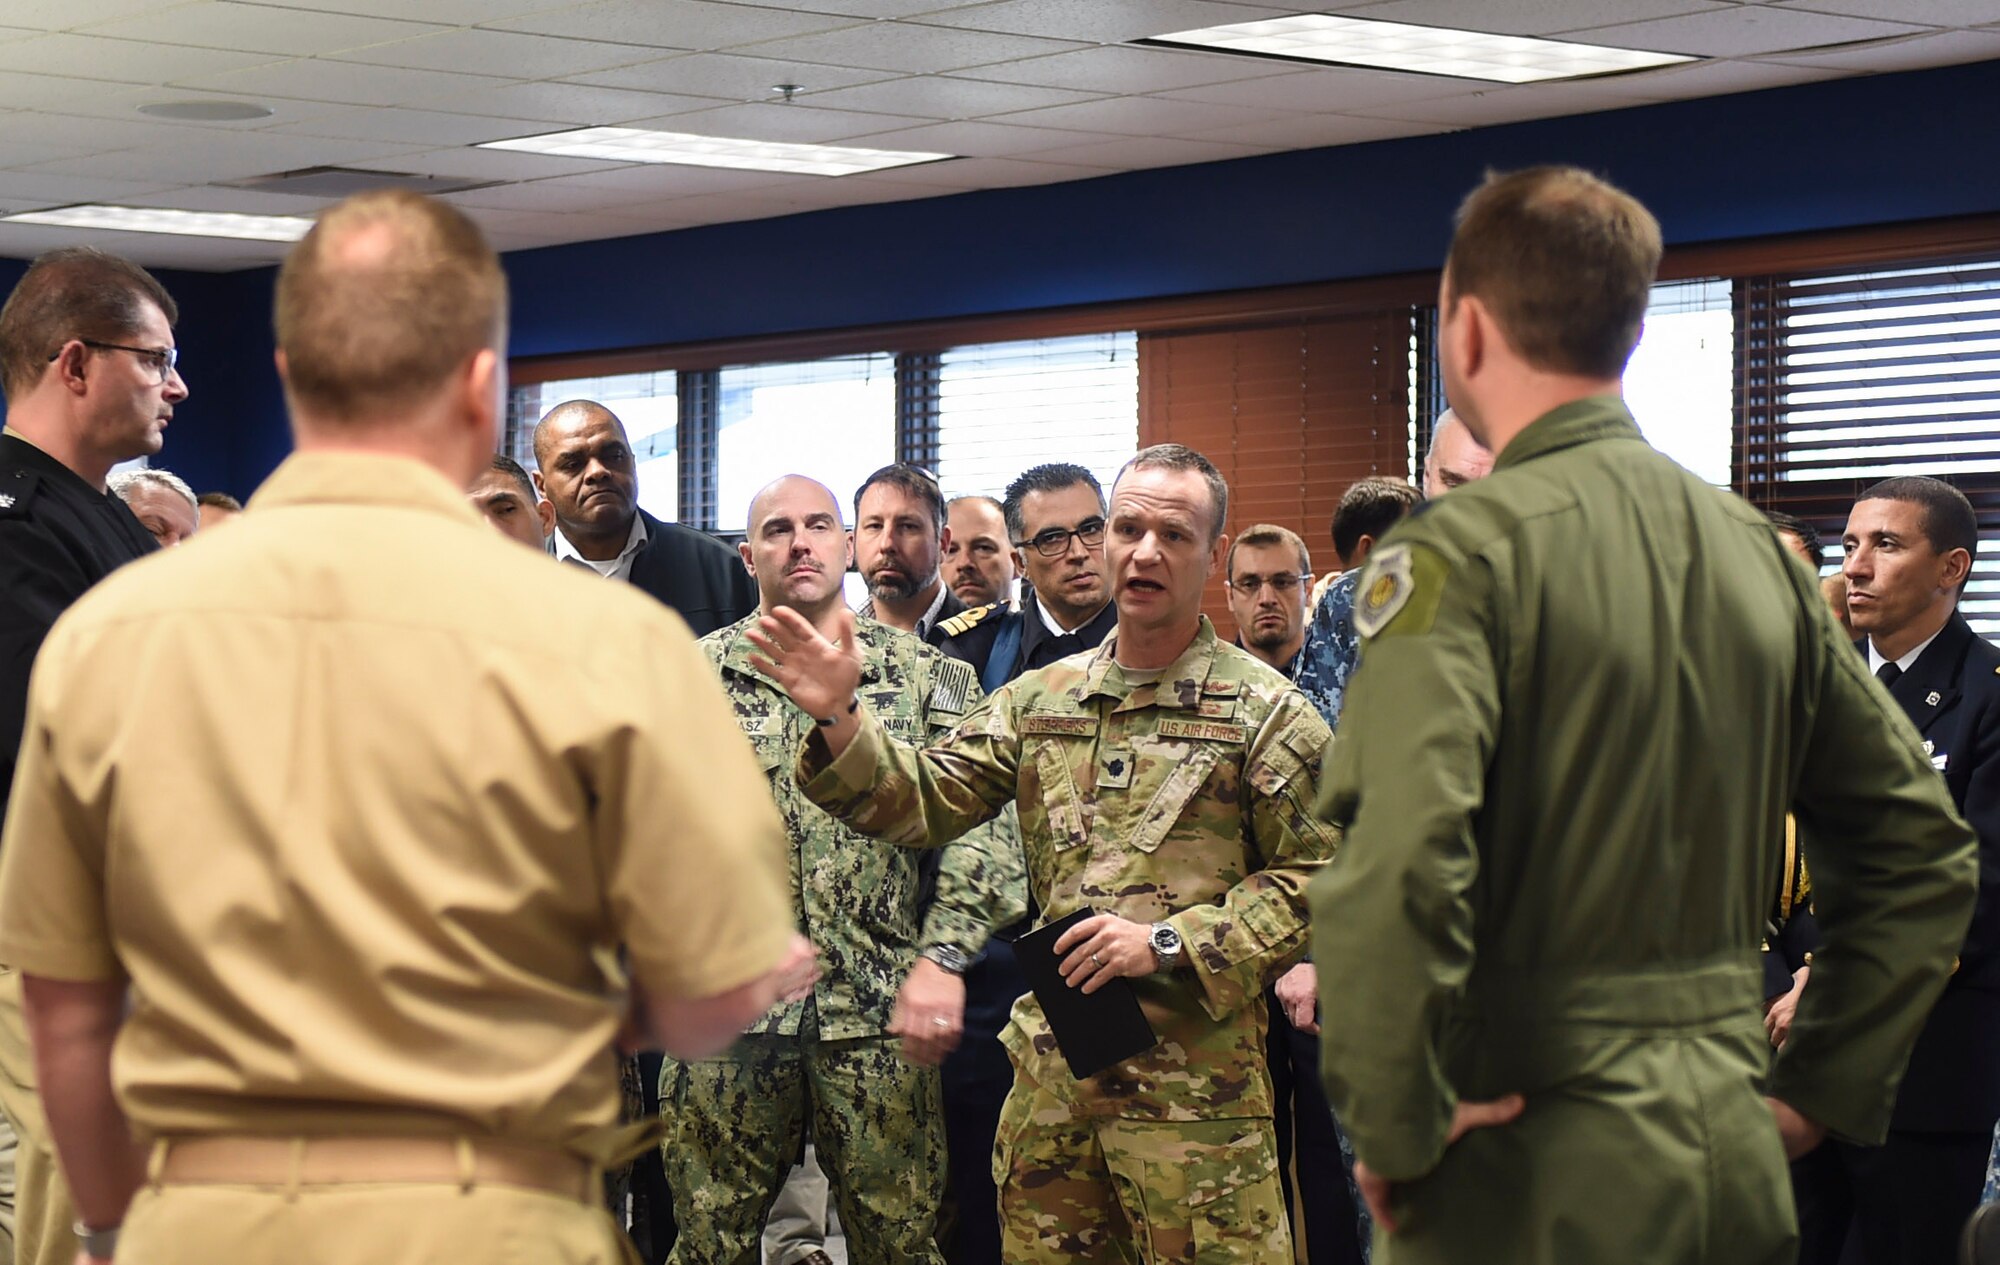 A group of Naval War College students, comprised of 56 foreign and joint military officers, discuss air mobility operations during a Nov. 13, 2018, visit to Joint Base Charleston, S.C.